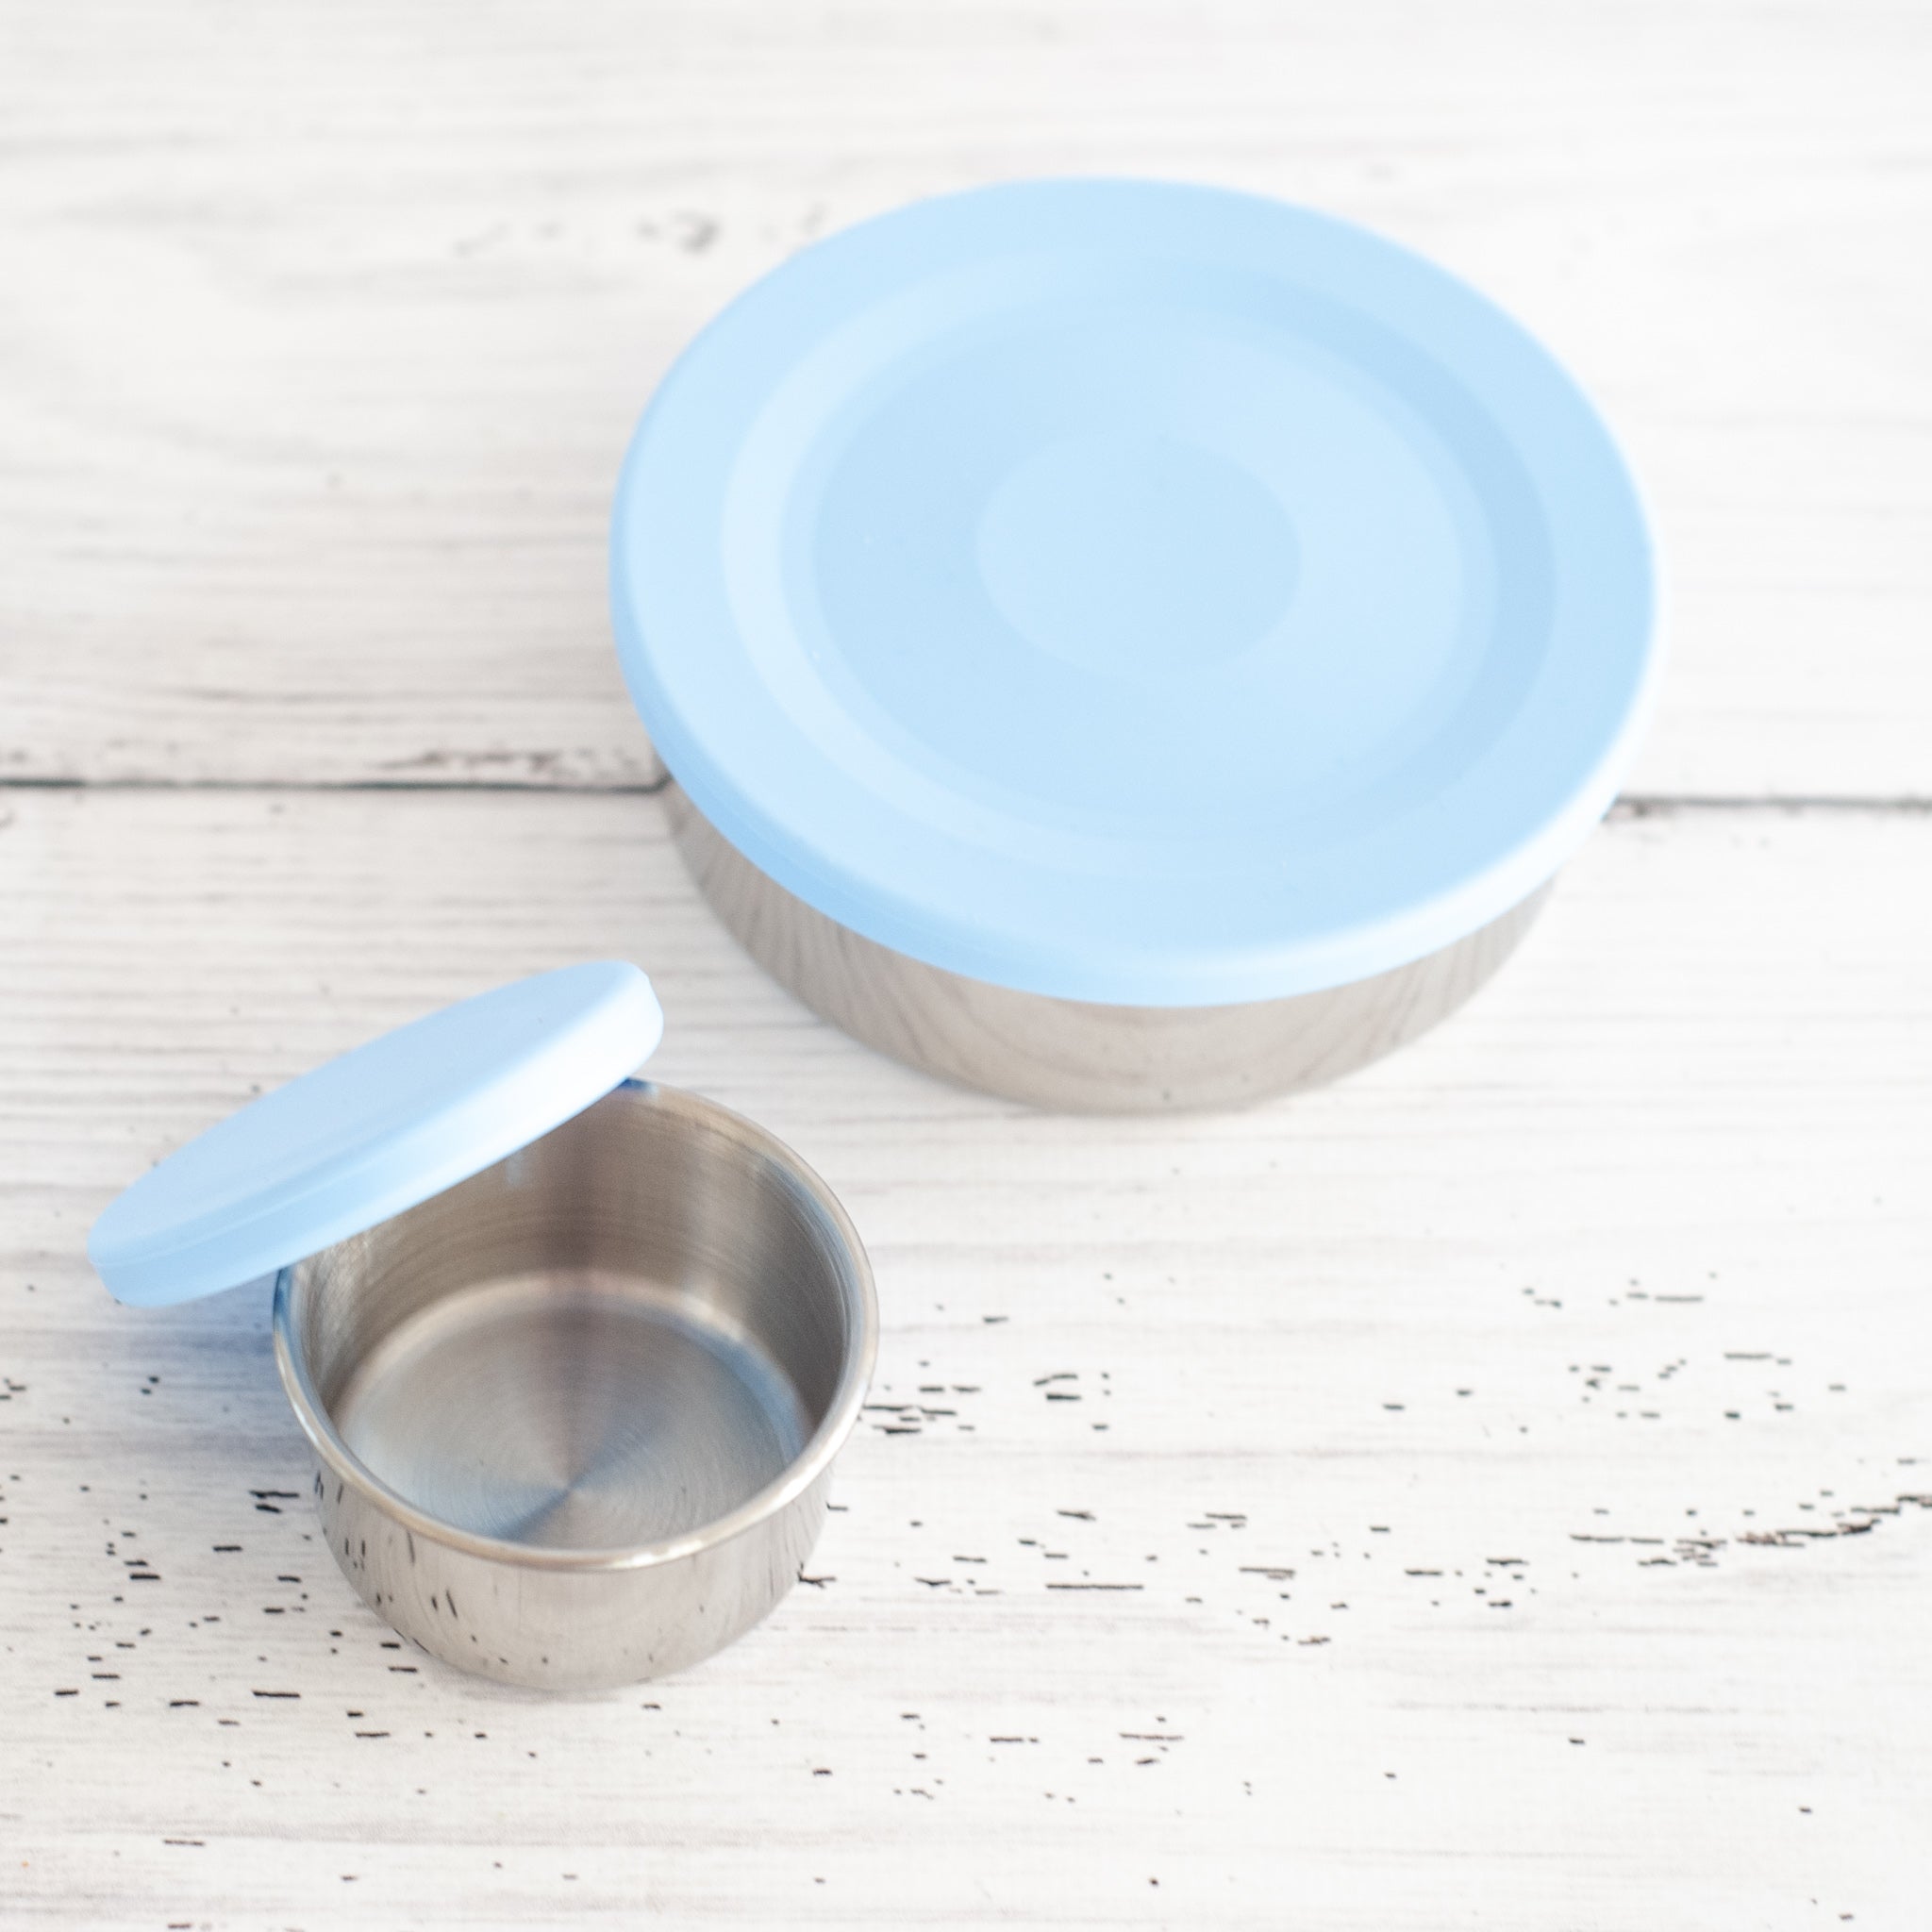 leak proof stainless steel snack container with blue silicone lid. nudie rudie lunch box